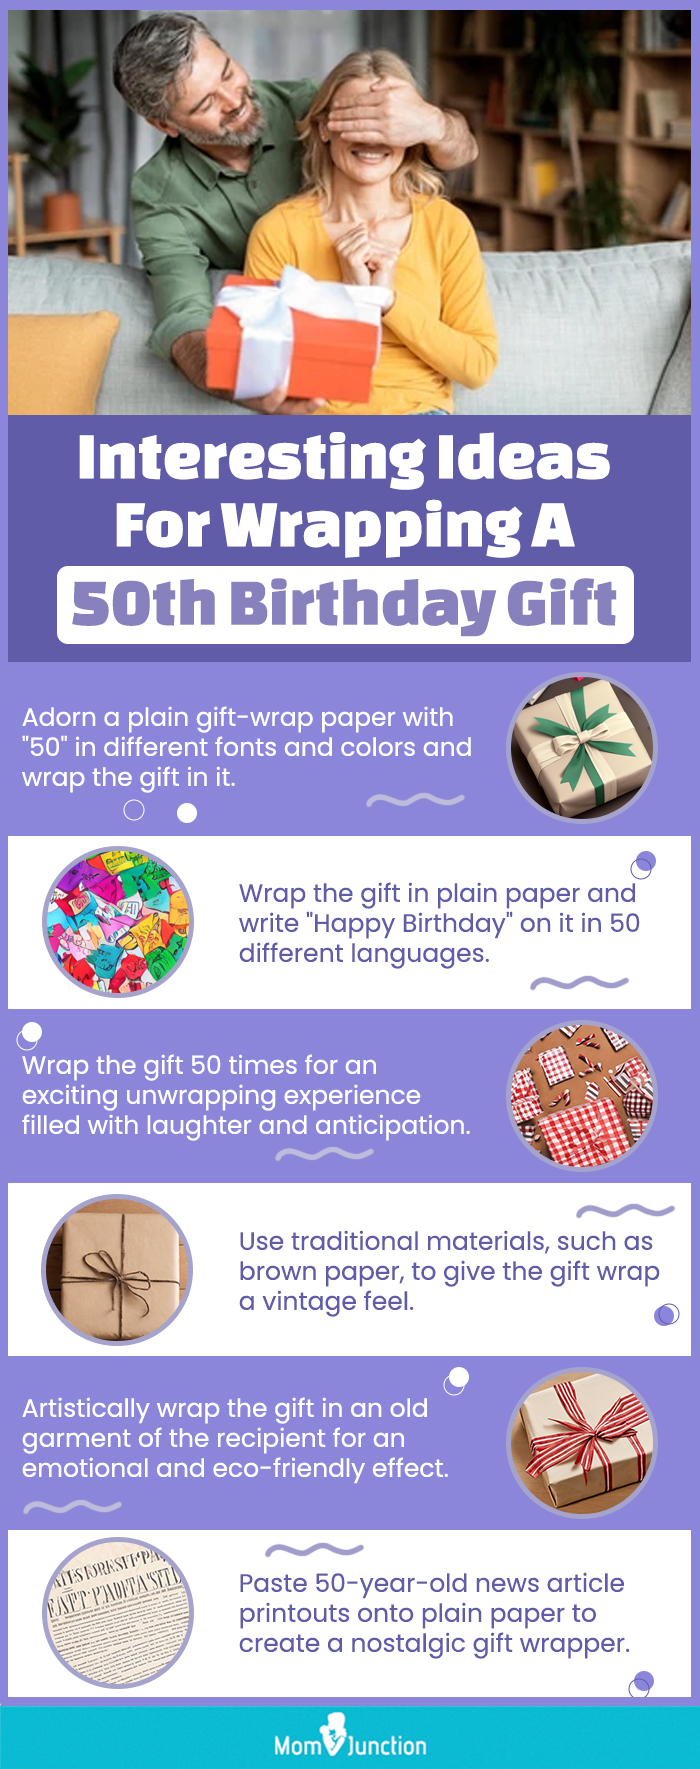 https://www.momjunction.com/wp-content/uploads/2023/08/Interesting-Ideas-For-Wrapping-A-50th-Birthday-Gift.jpg